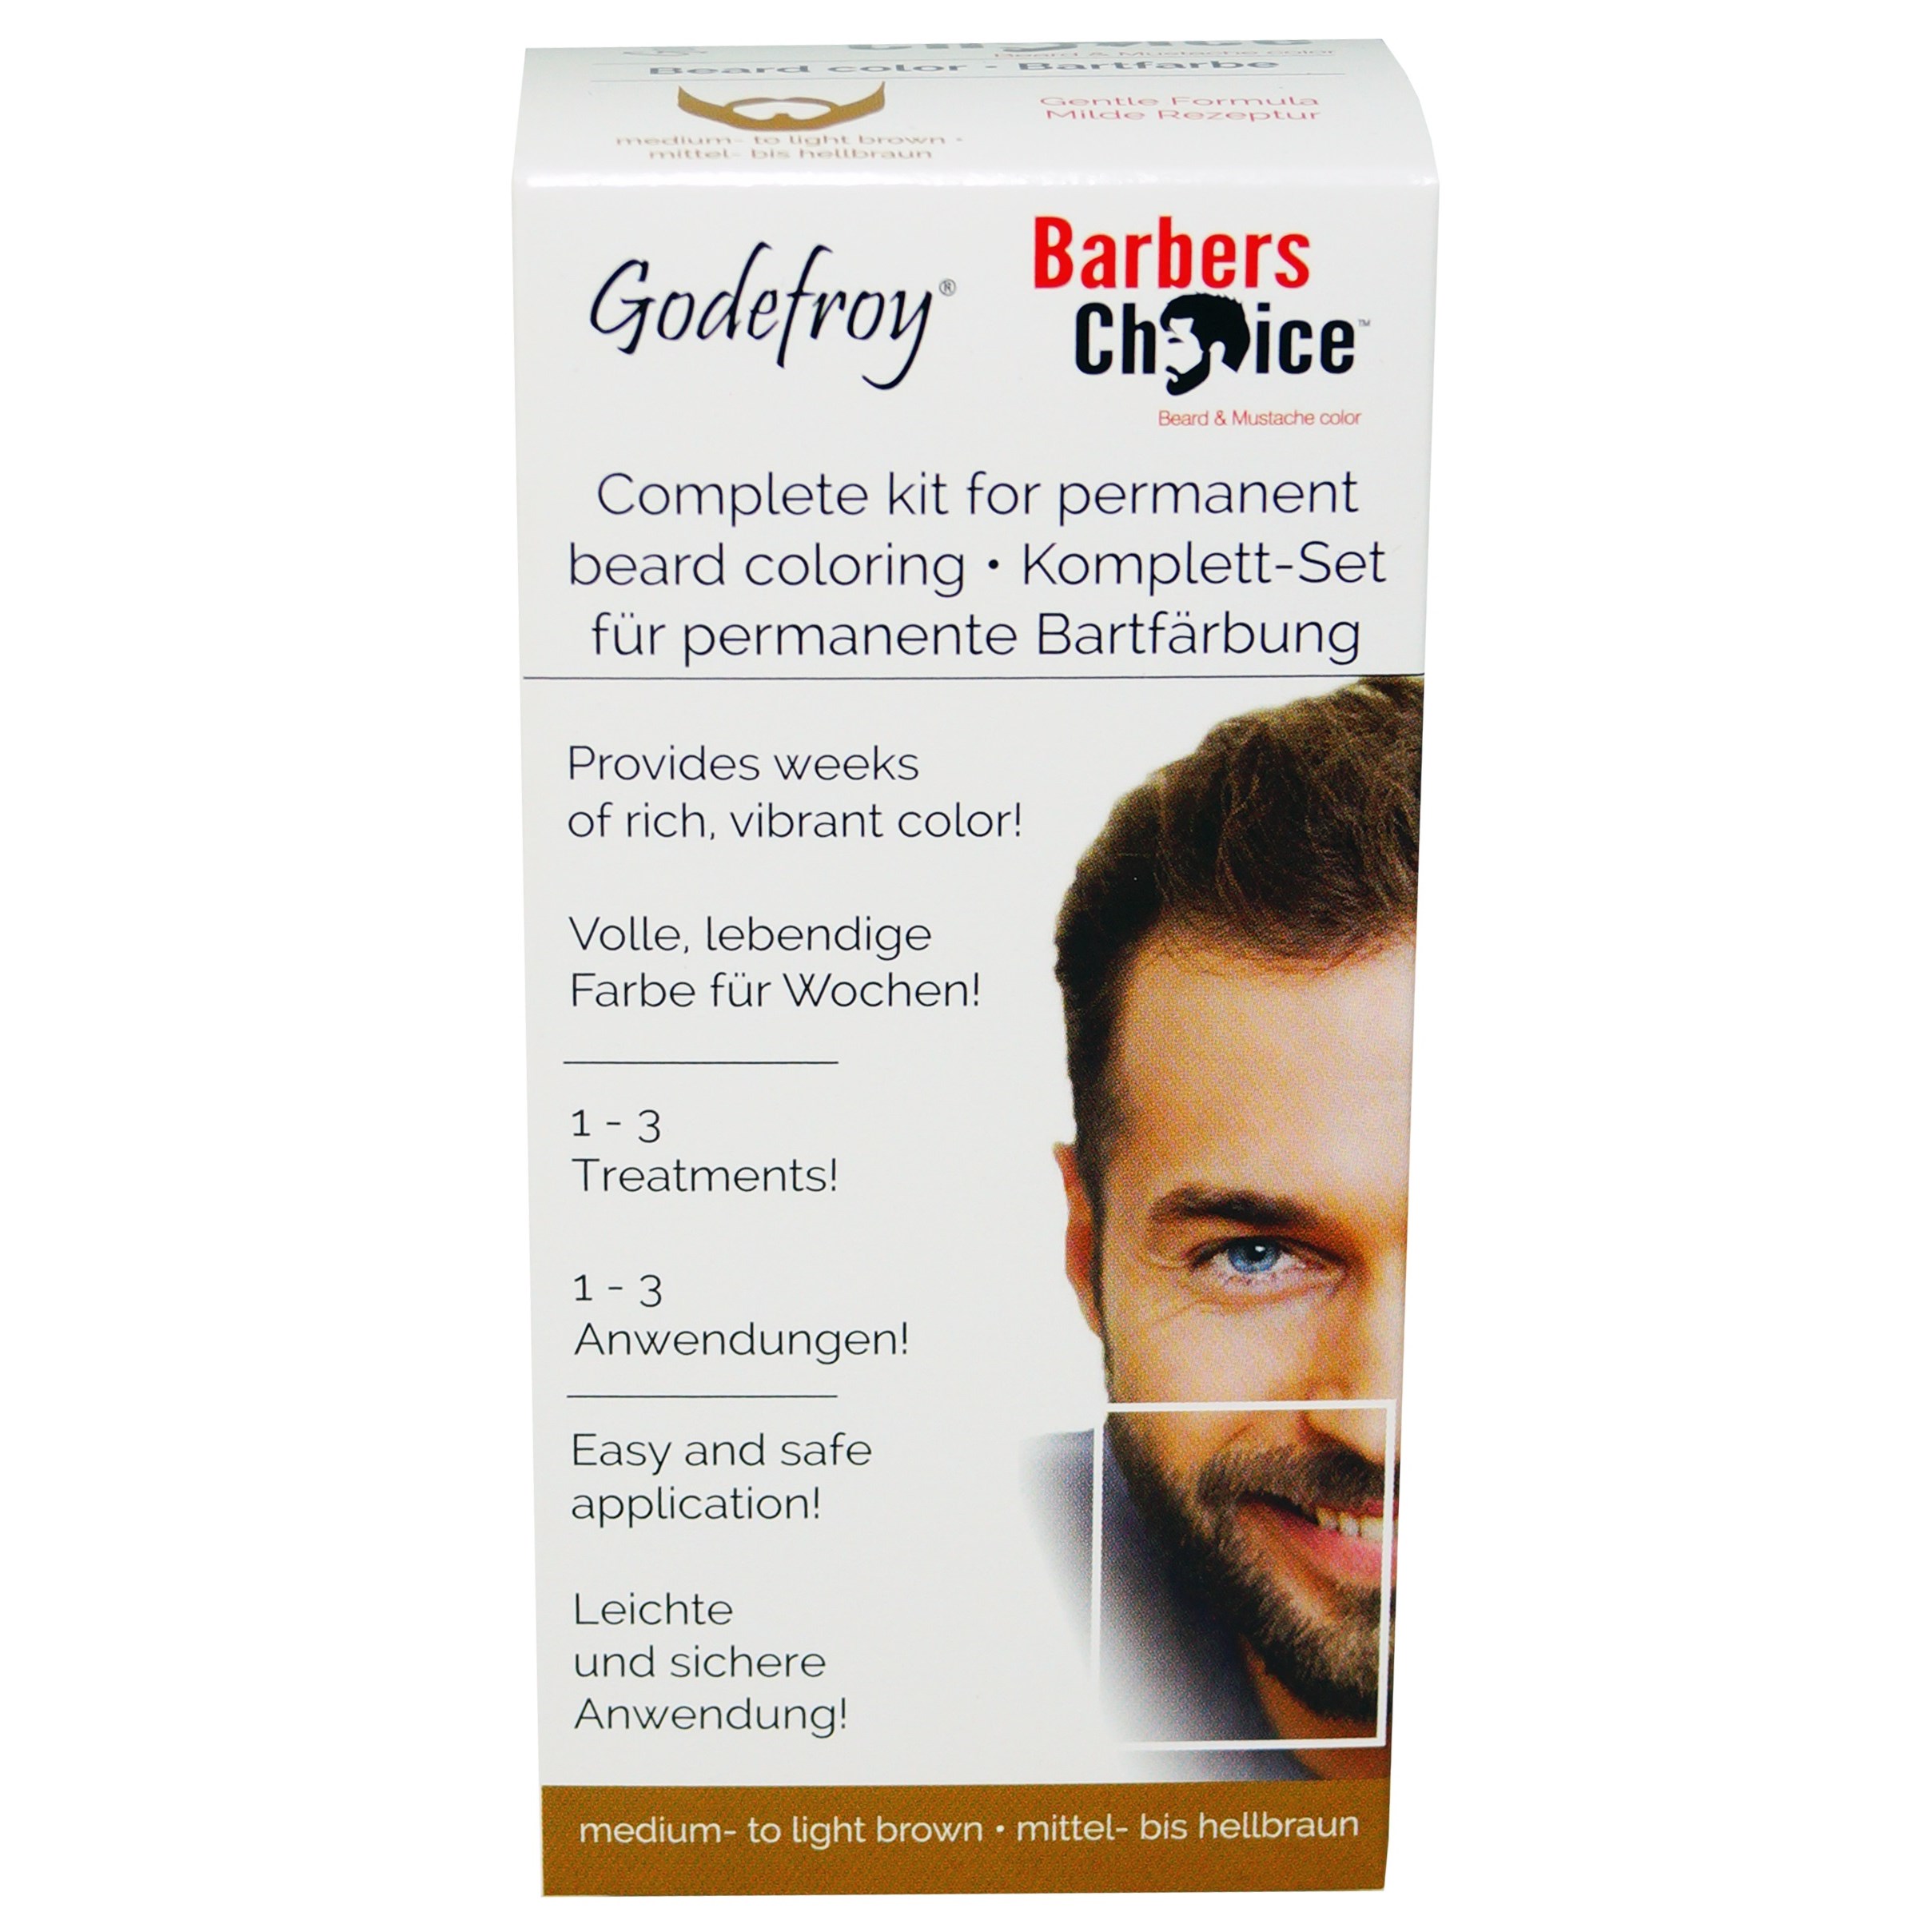 Godefroy Barbers Choice Medium to lightbrown